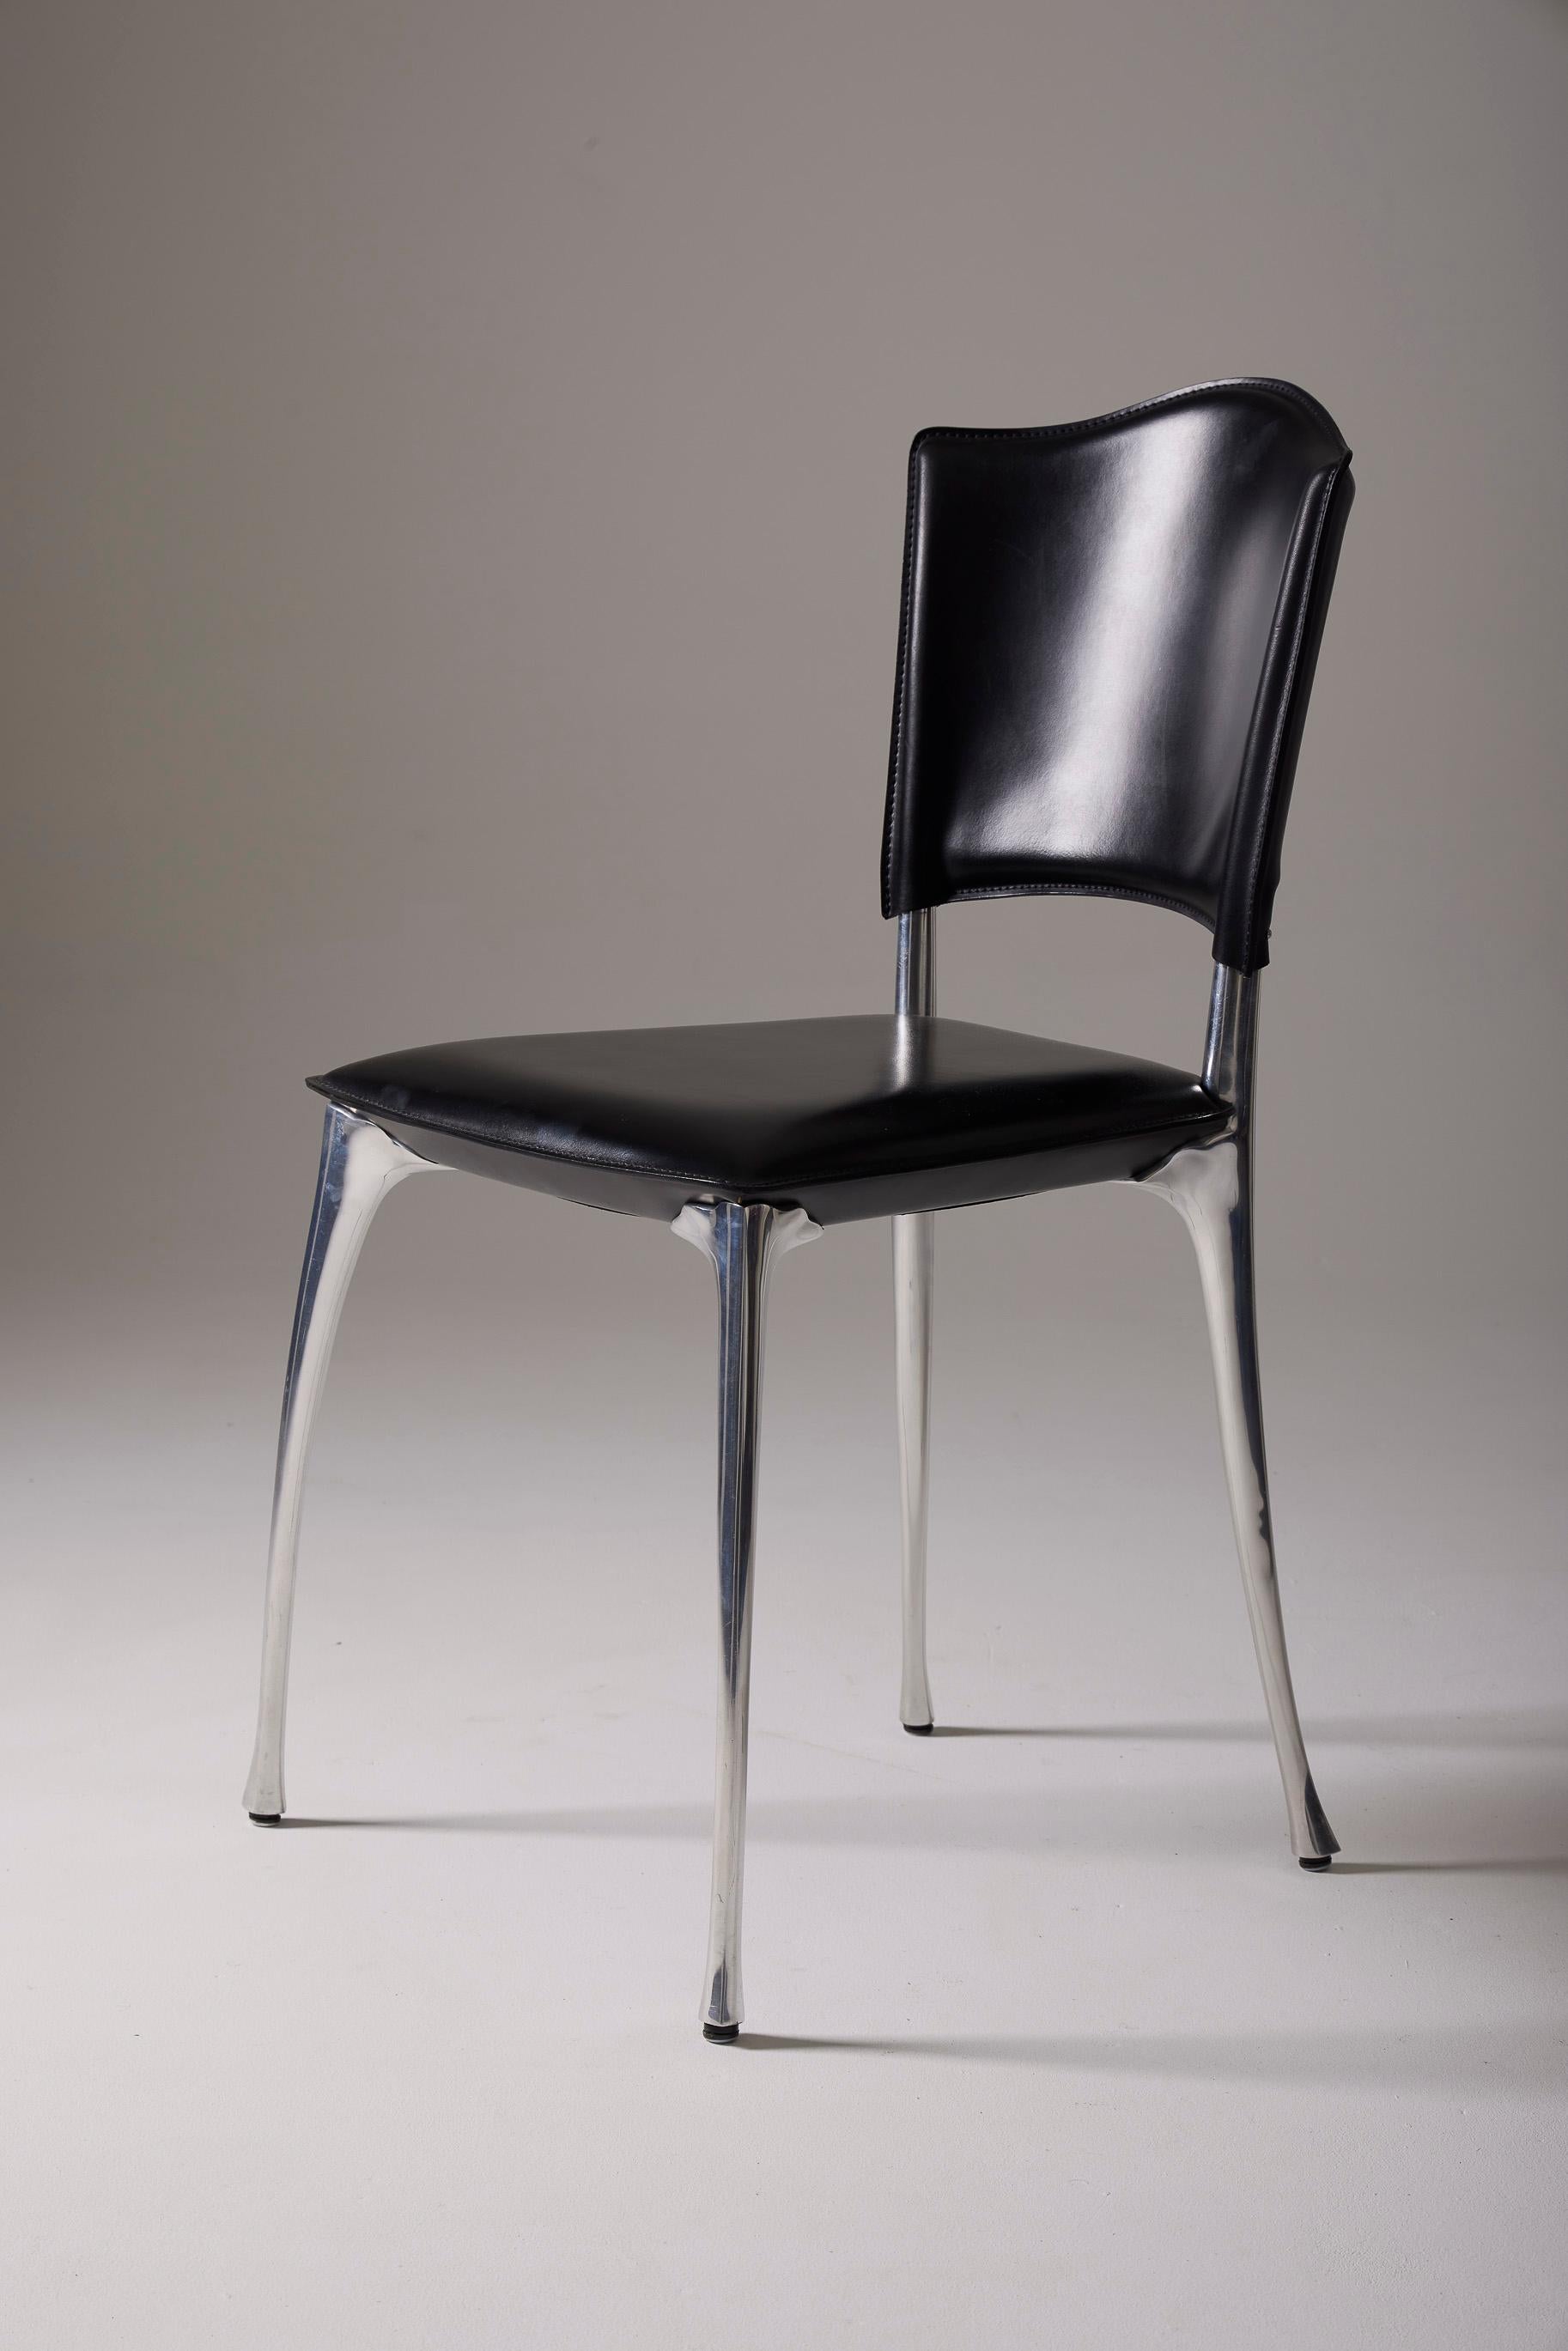 Protis chair with a chrome metal frame and smooth high-quality leather seat and backrest. Very good condition. This chair will be perfect as an office chair.
LP2857